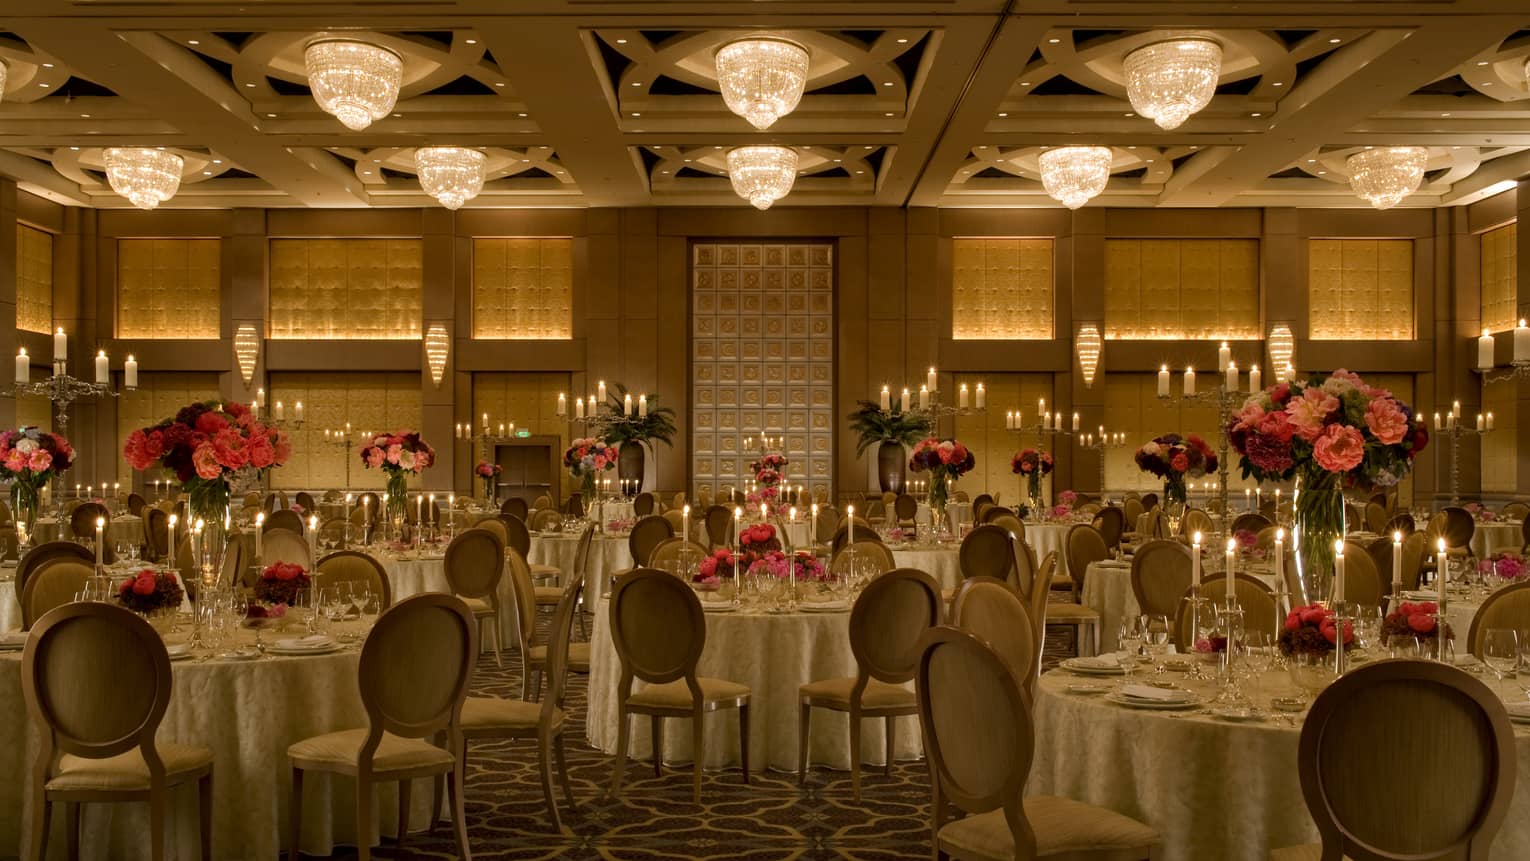 Dimly lit event room with chandeliers, tables set with large floral displays, glasses and candles 